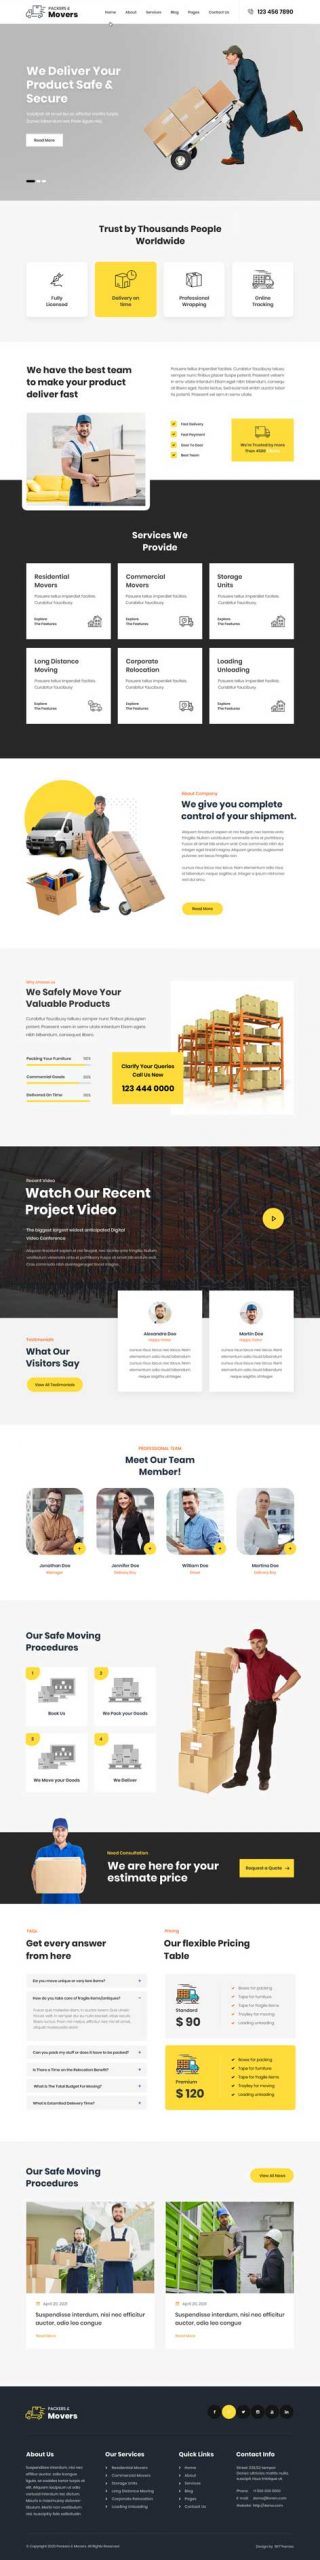 packers and movers WordPress theme 1 scaled